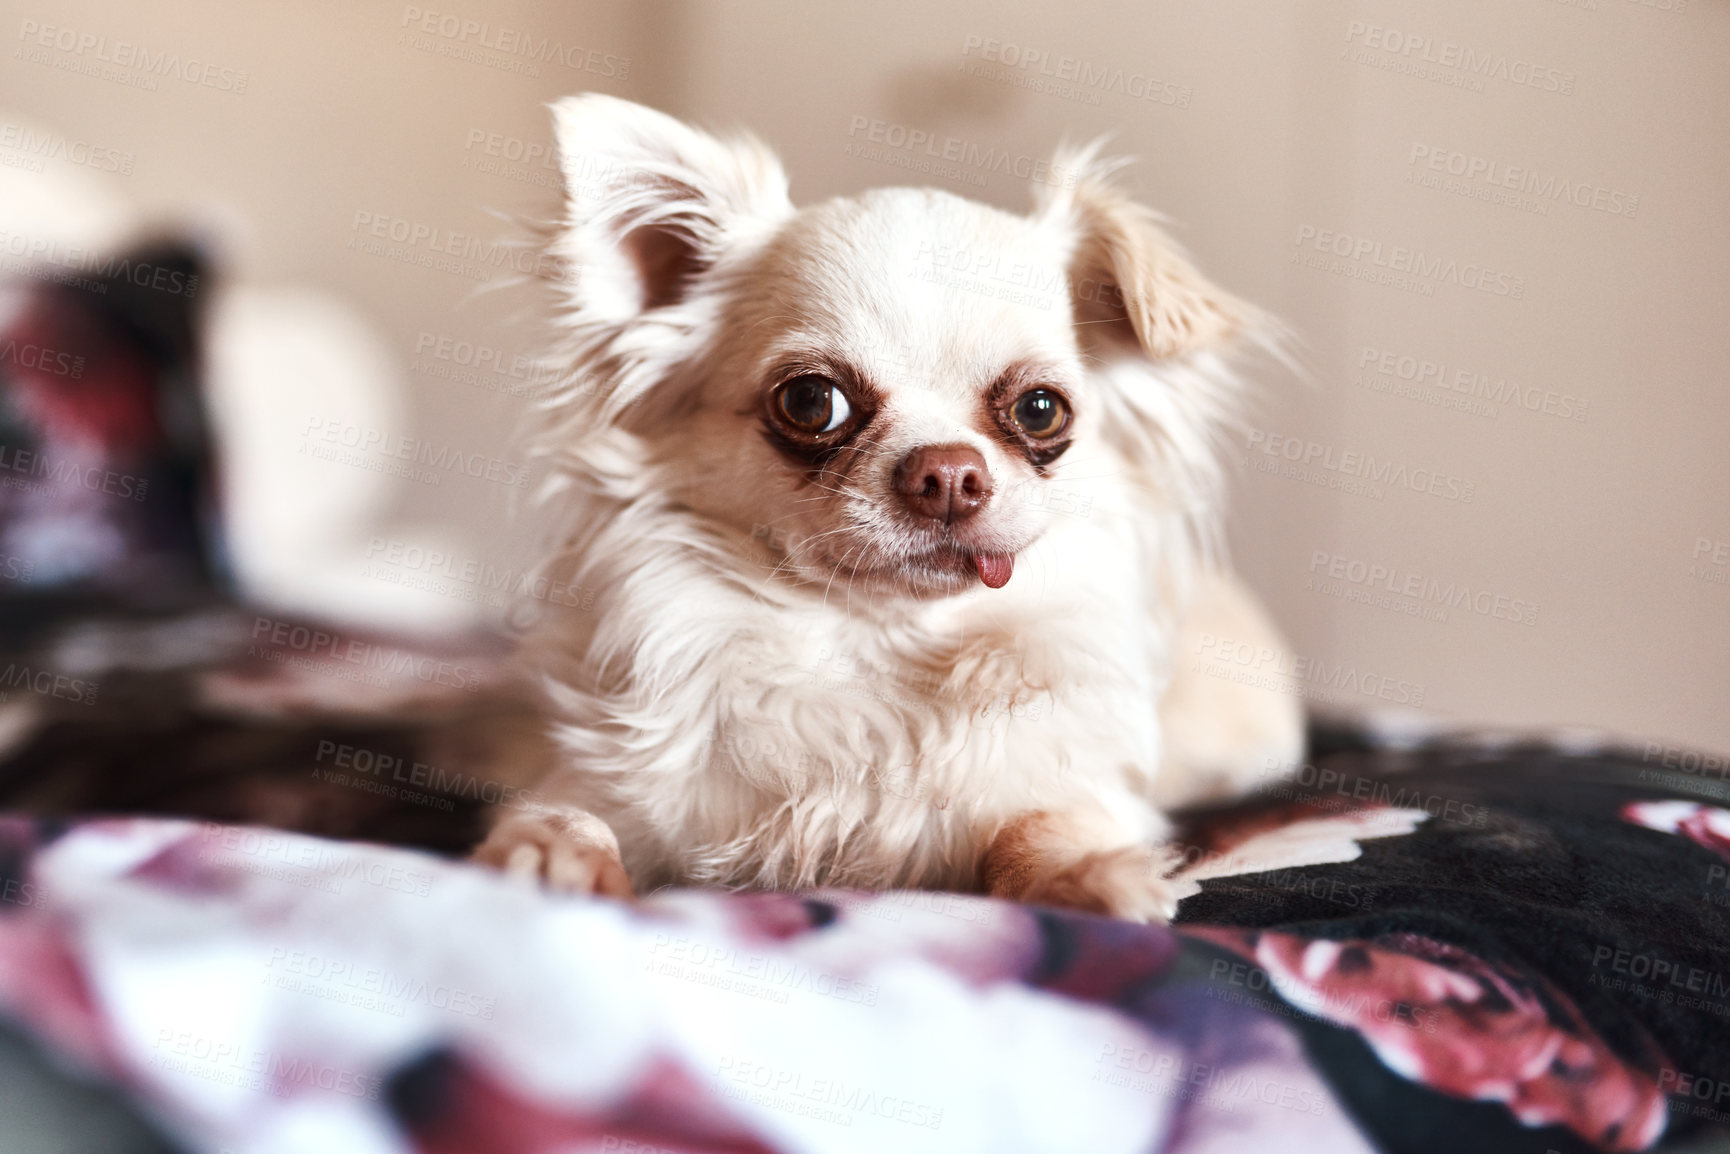 Buy stock photo Shot of an adorable dog sitting on the bed